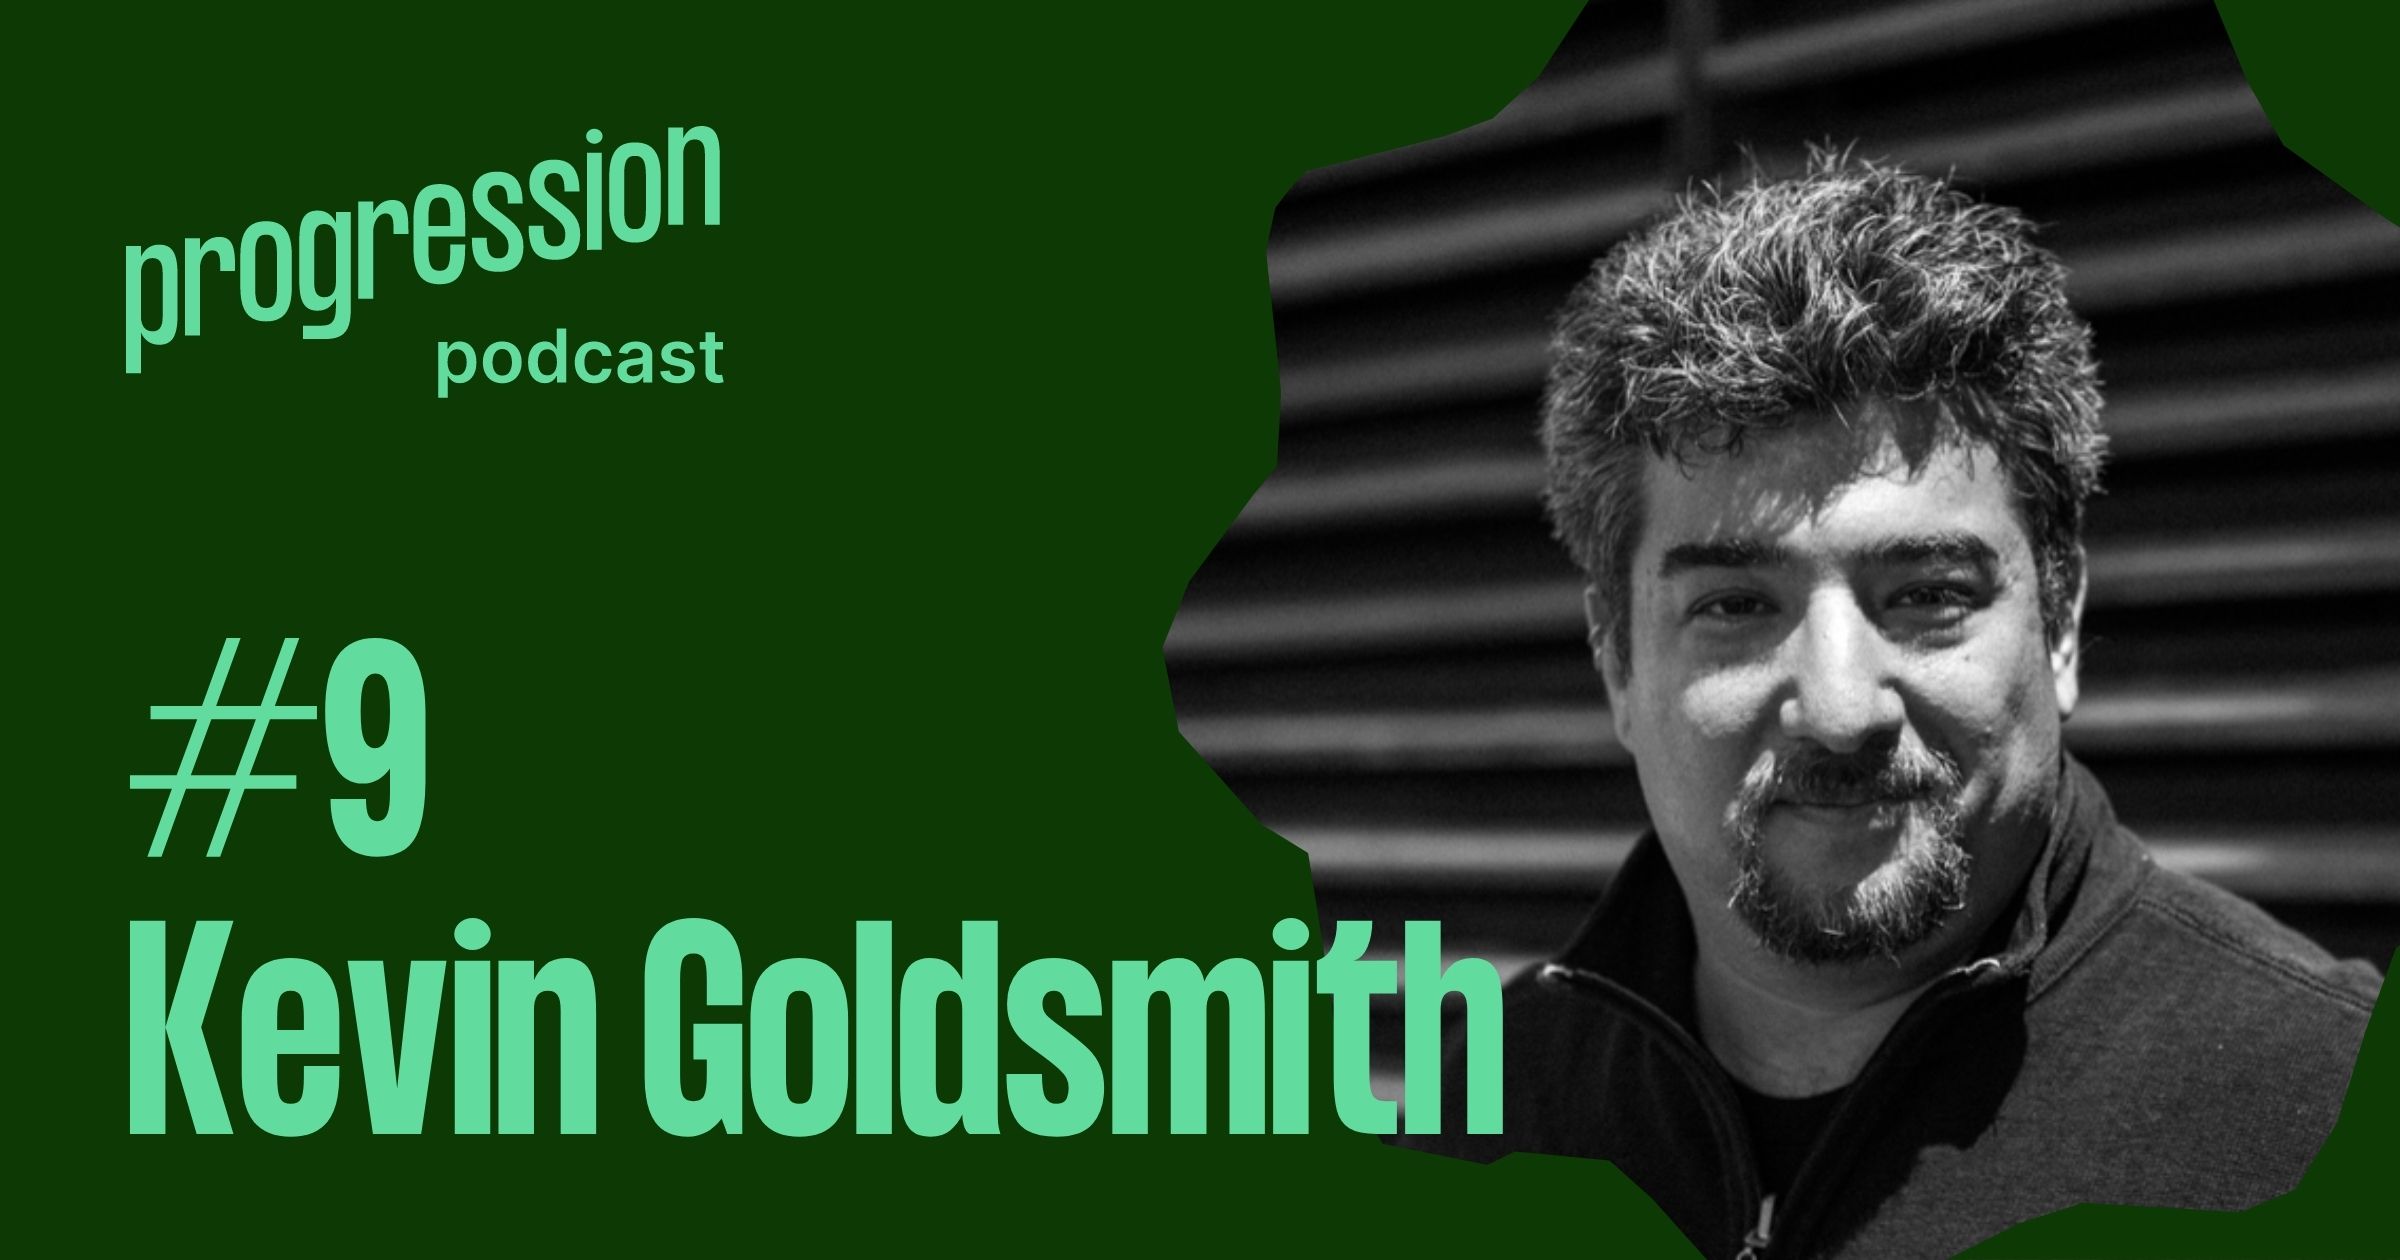 Podcast #9: Kevin Goldsmith on the Spotify model and rolling out progression at scale